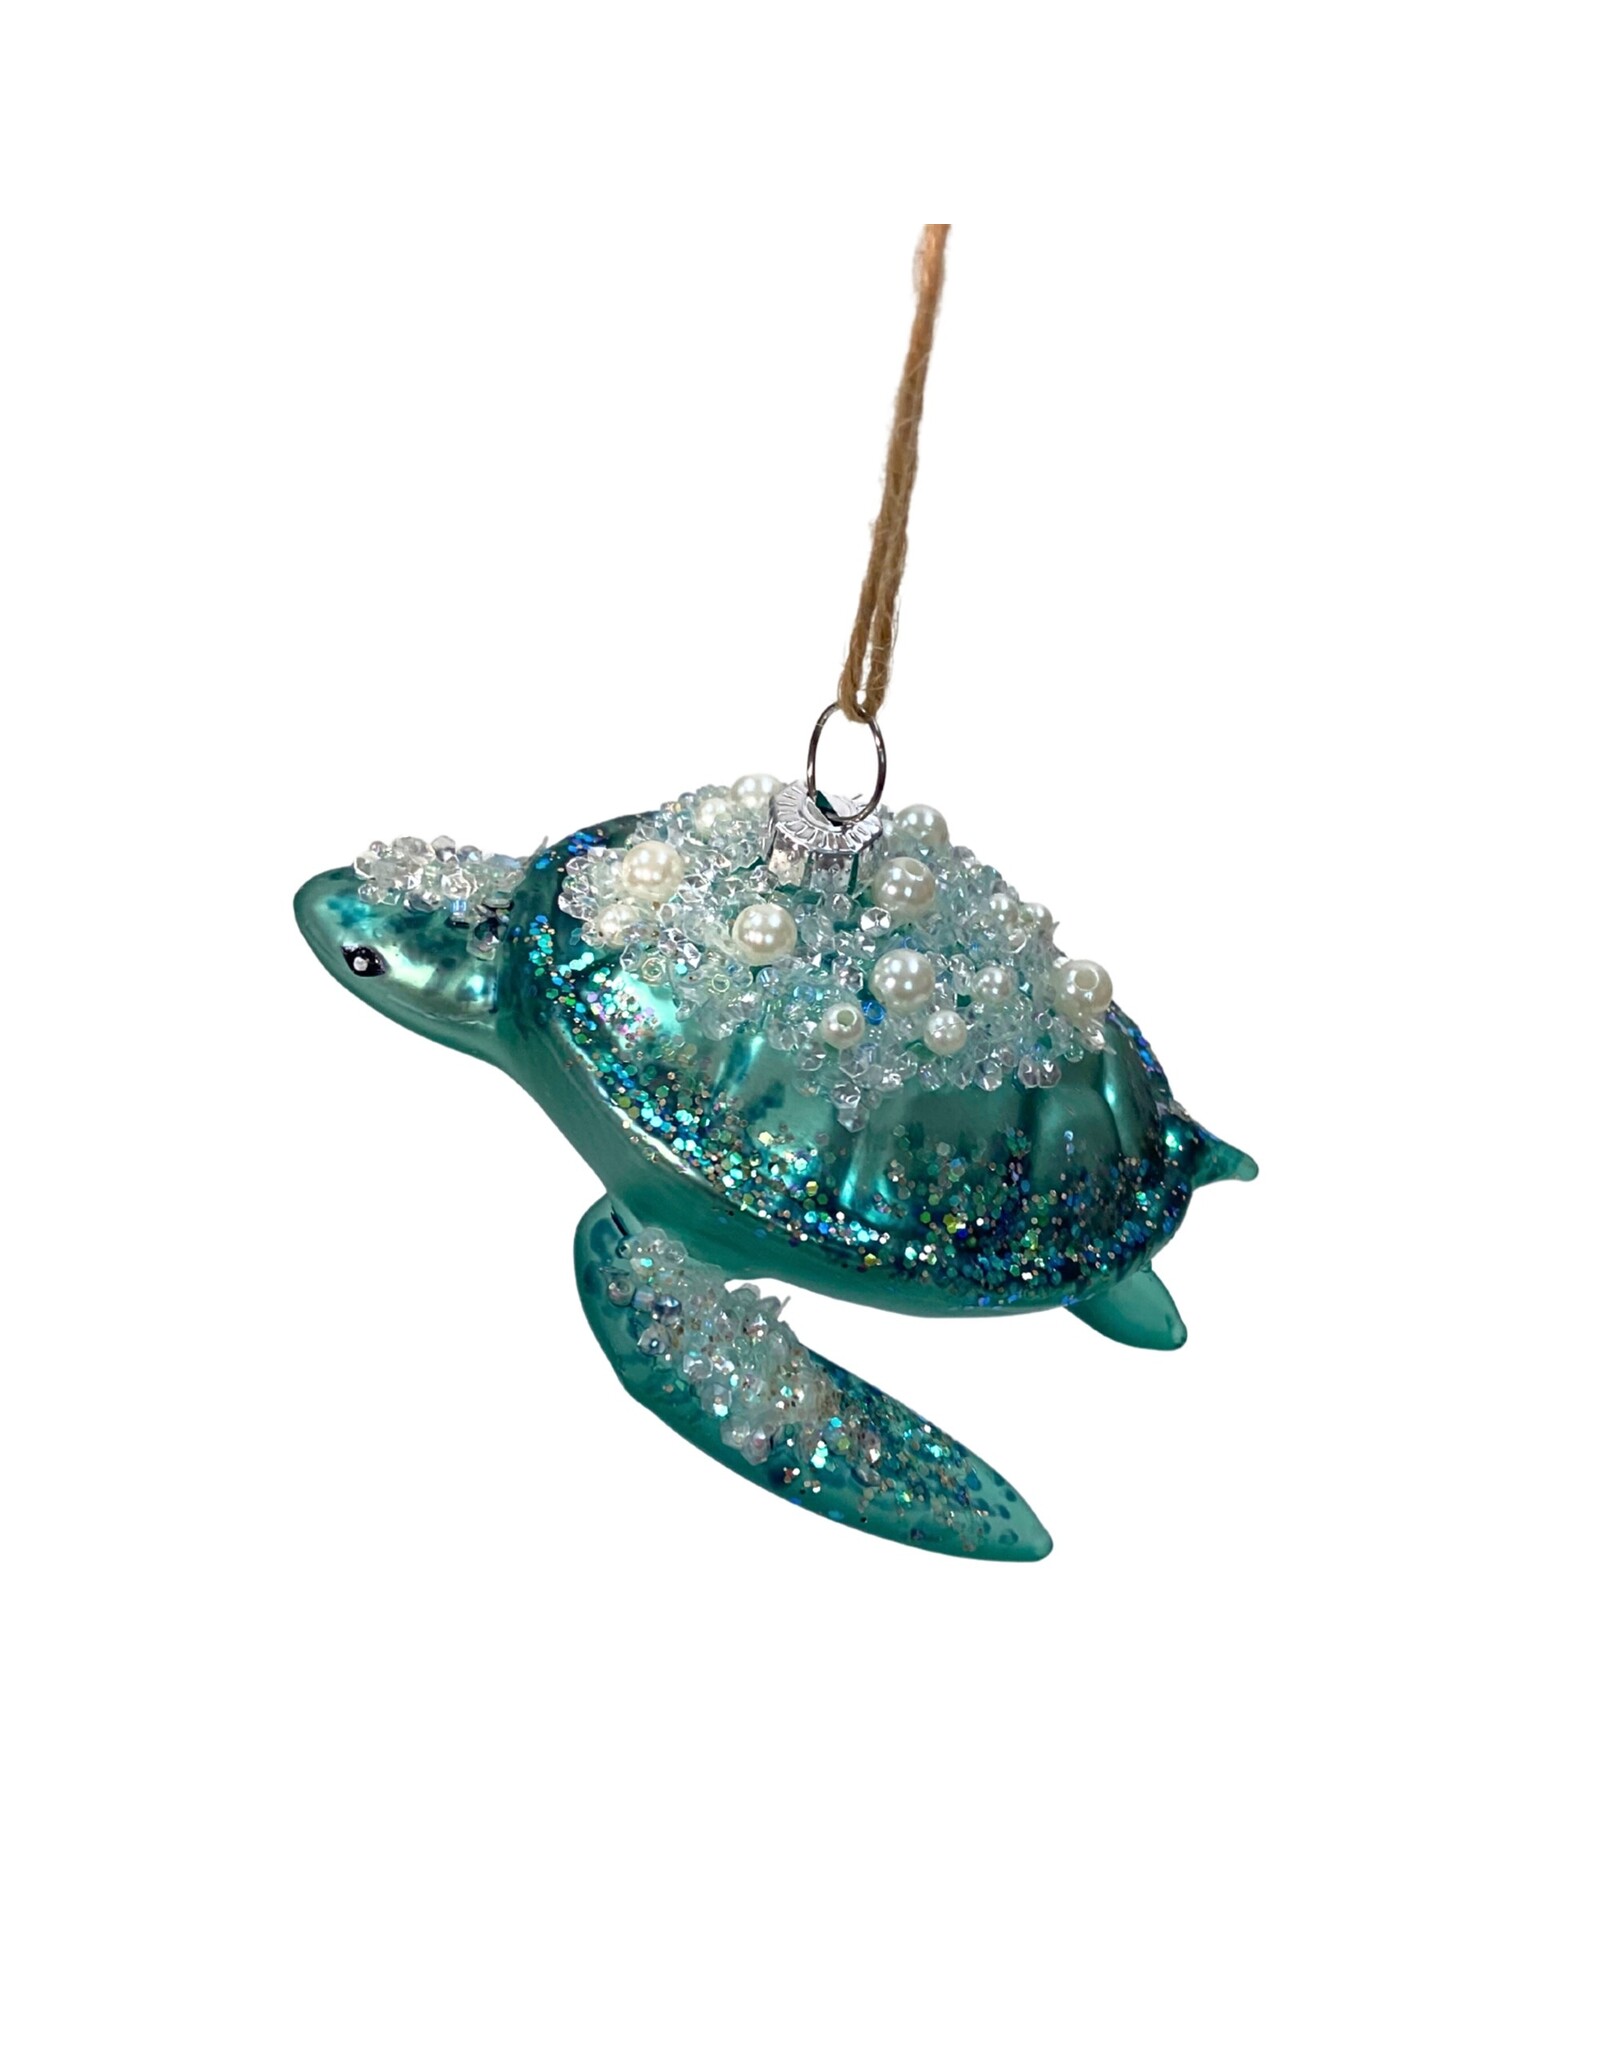 David Christophers Sea Turtle Glass Ornament w Beads And Pearls